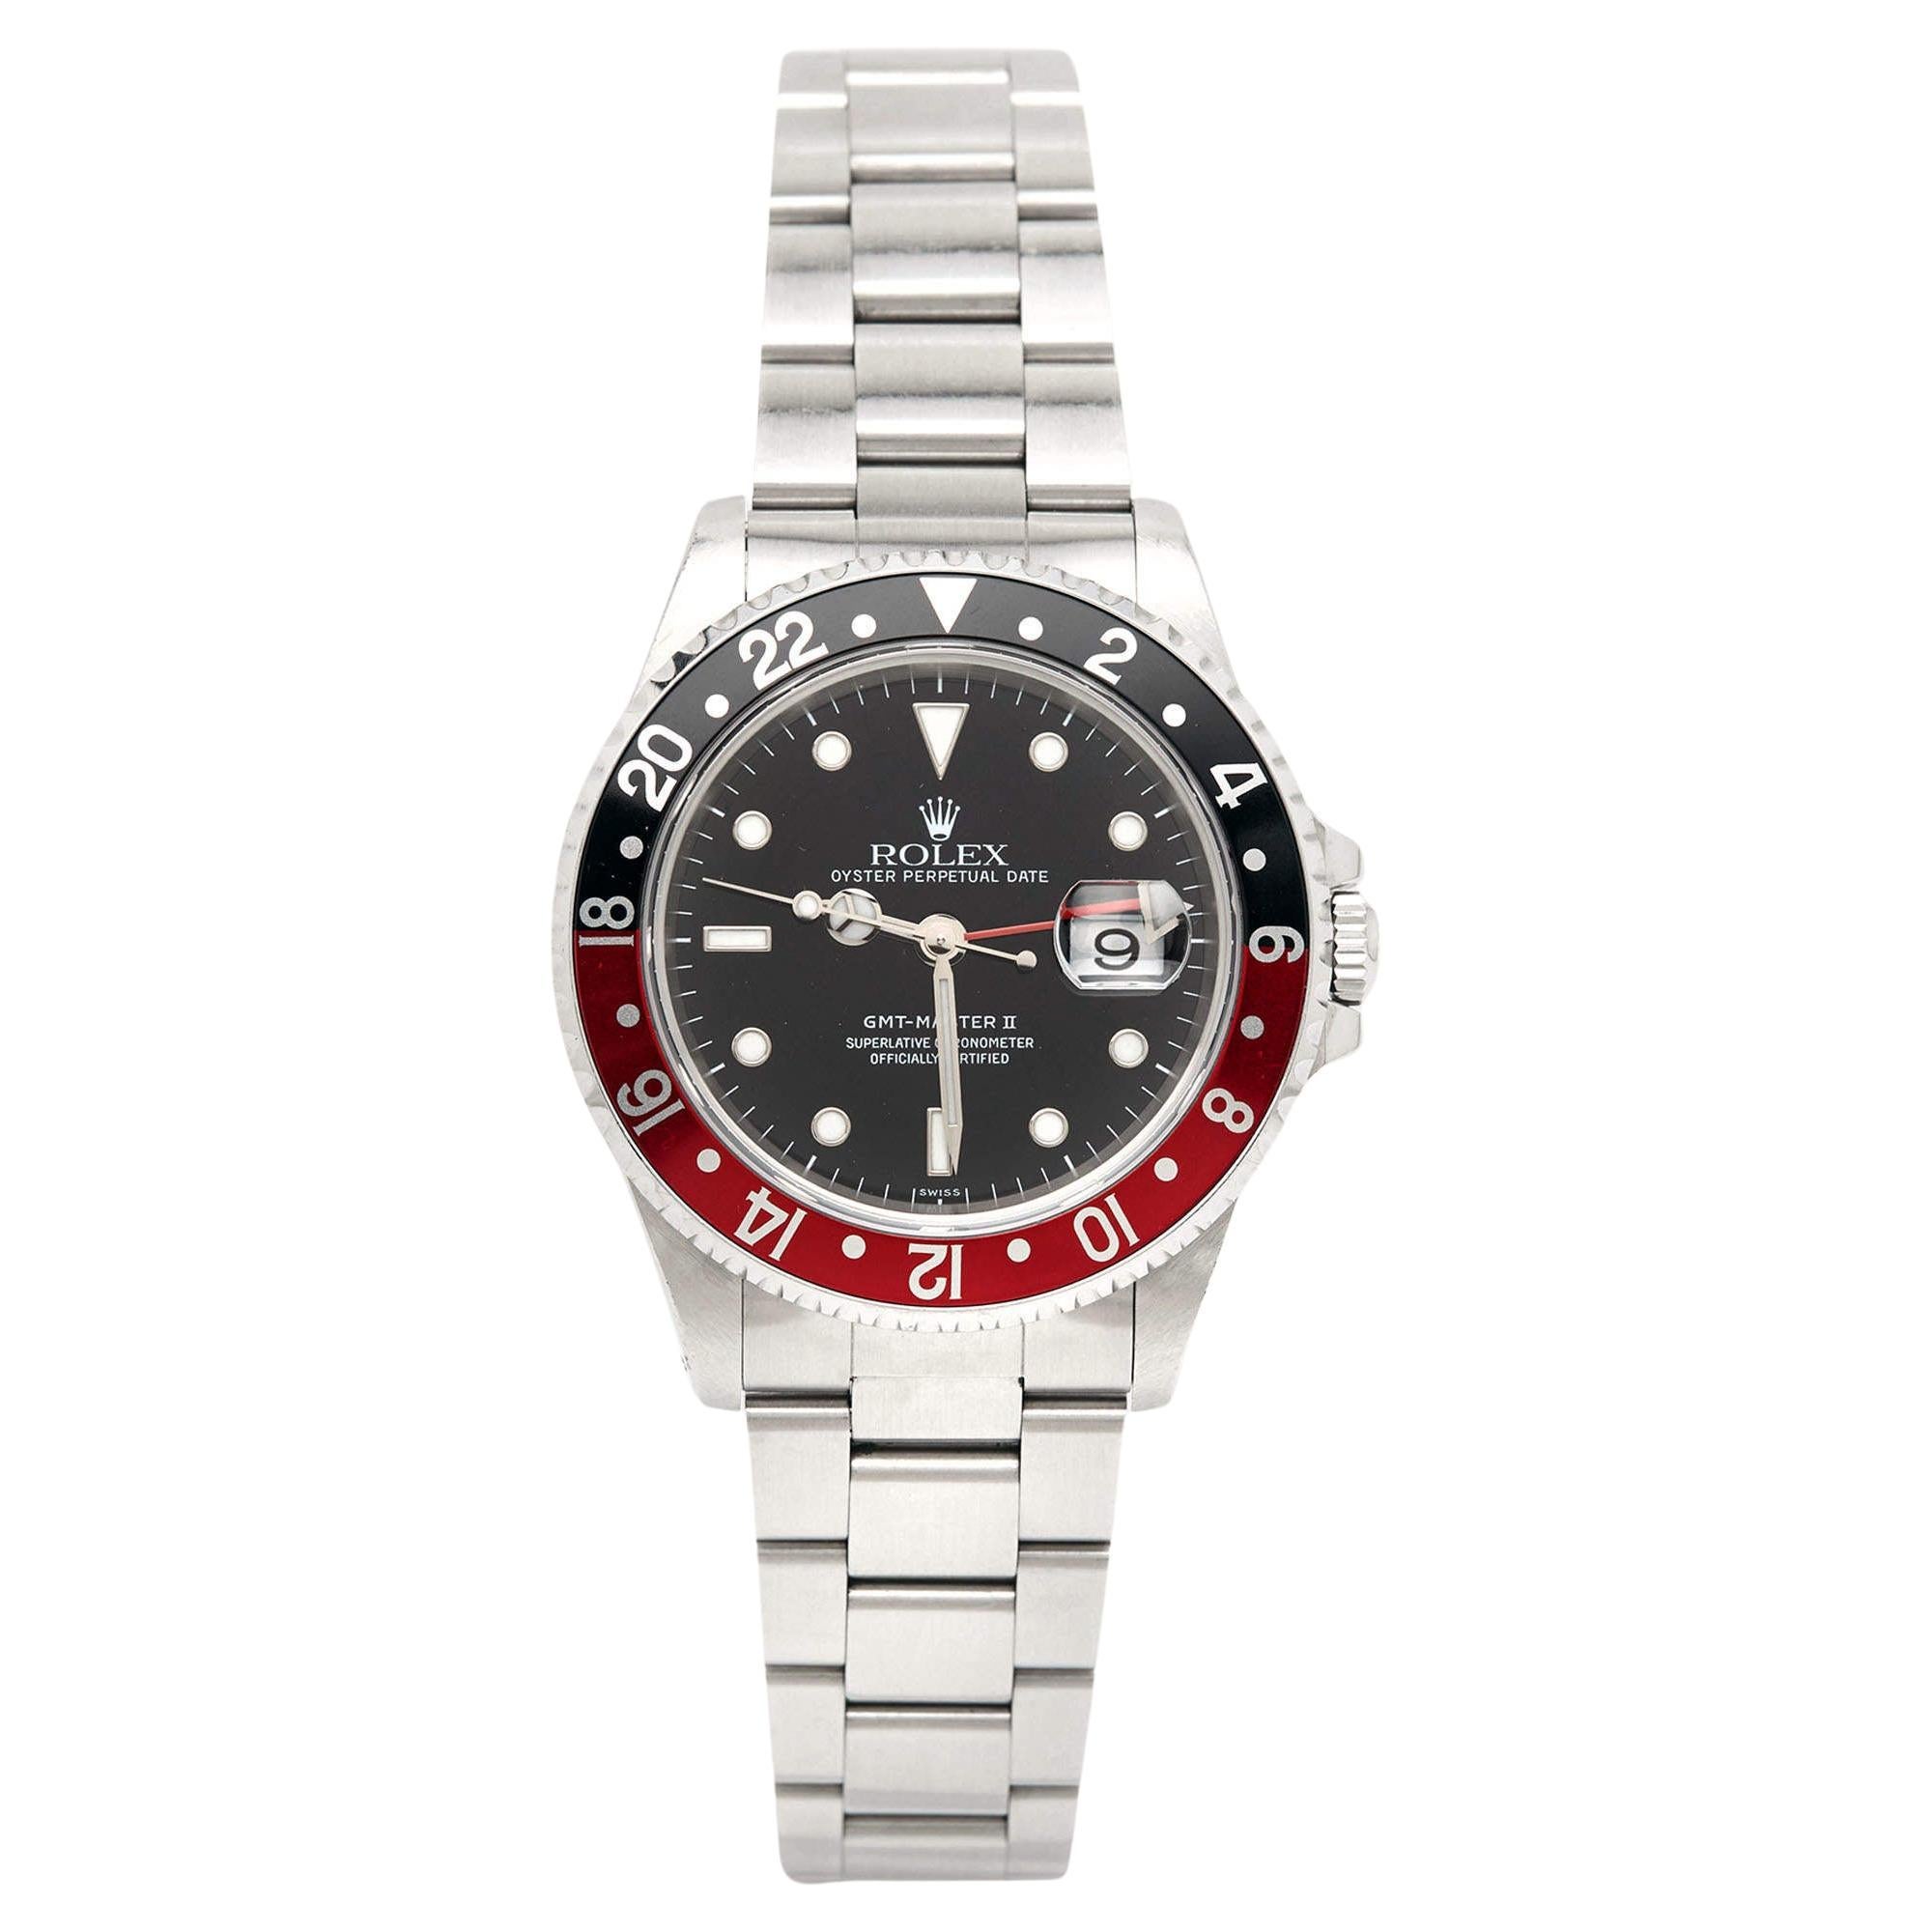 Rolex Black Stainless Steel GMT-Master II 16710 Automatic Men's Wristwatch 40 mm For Sale